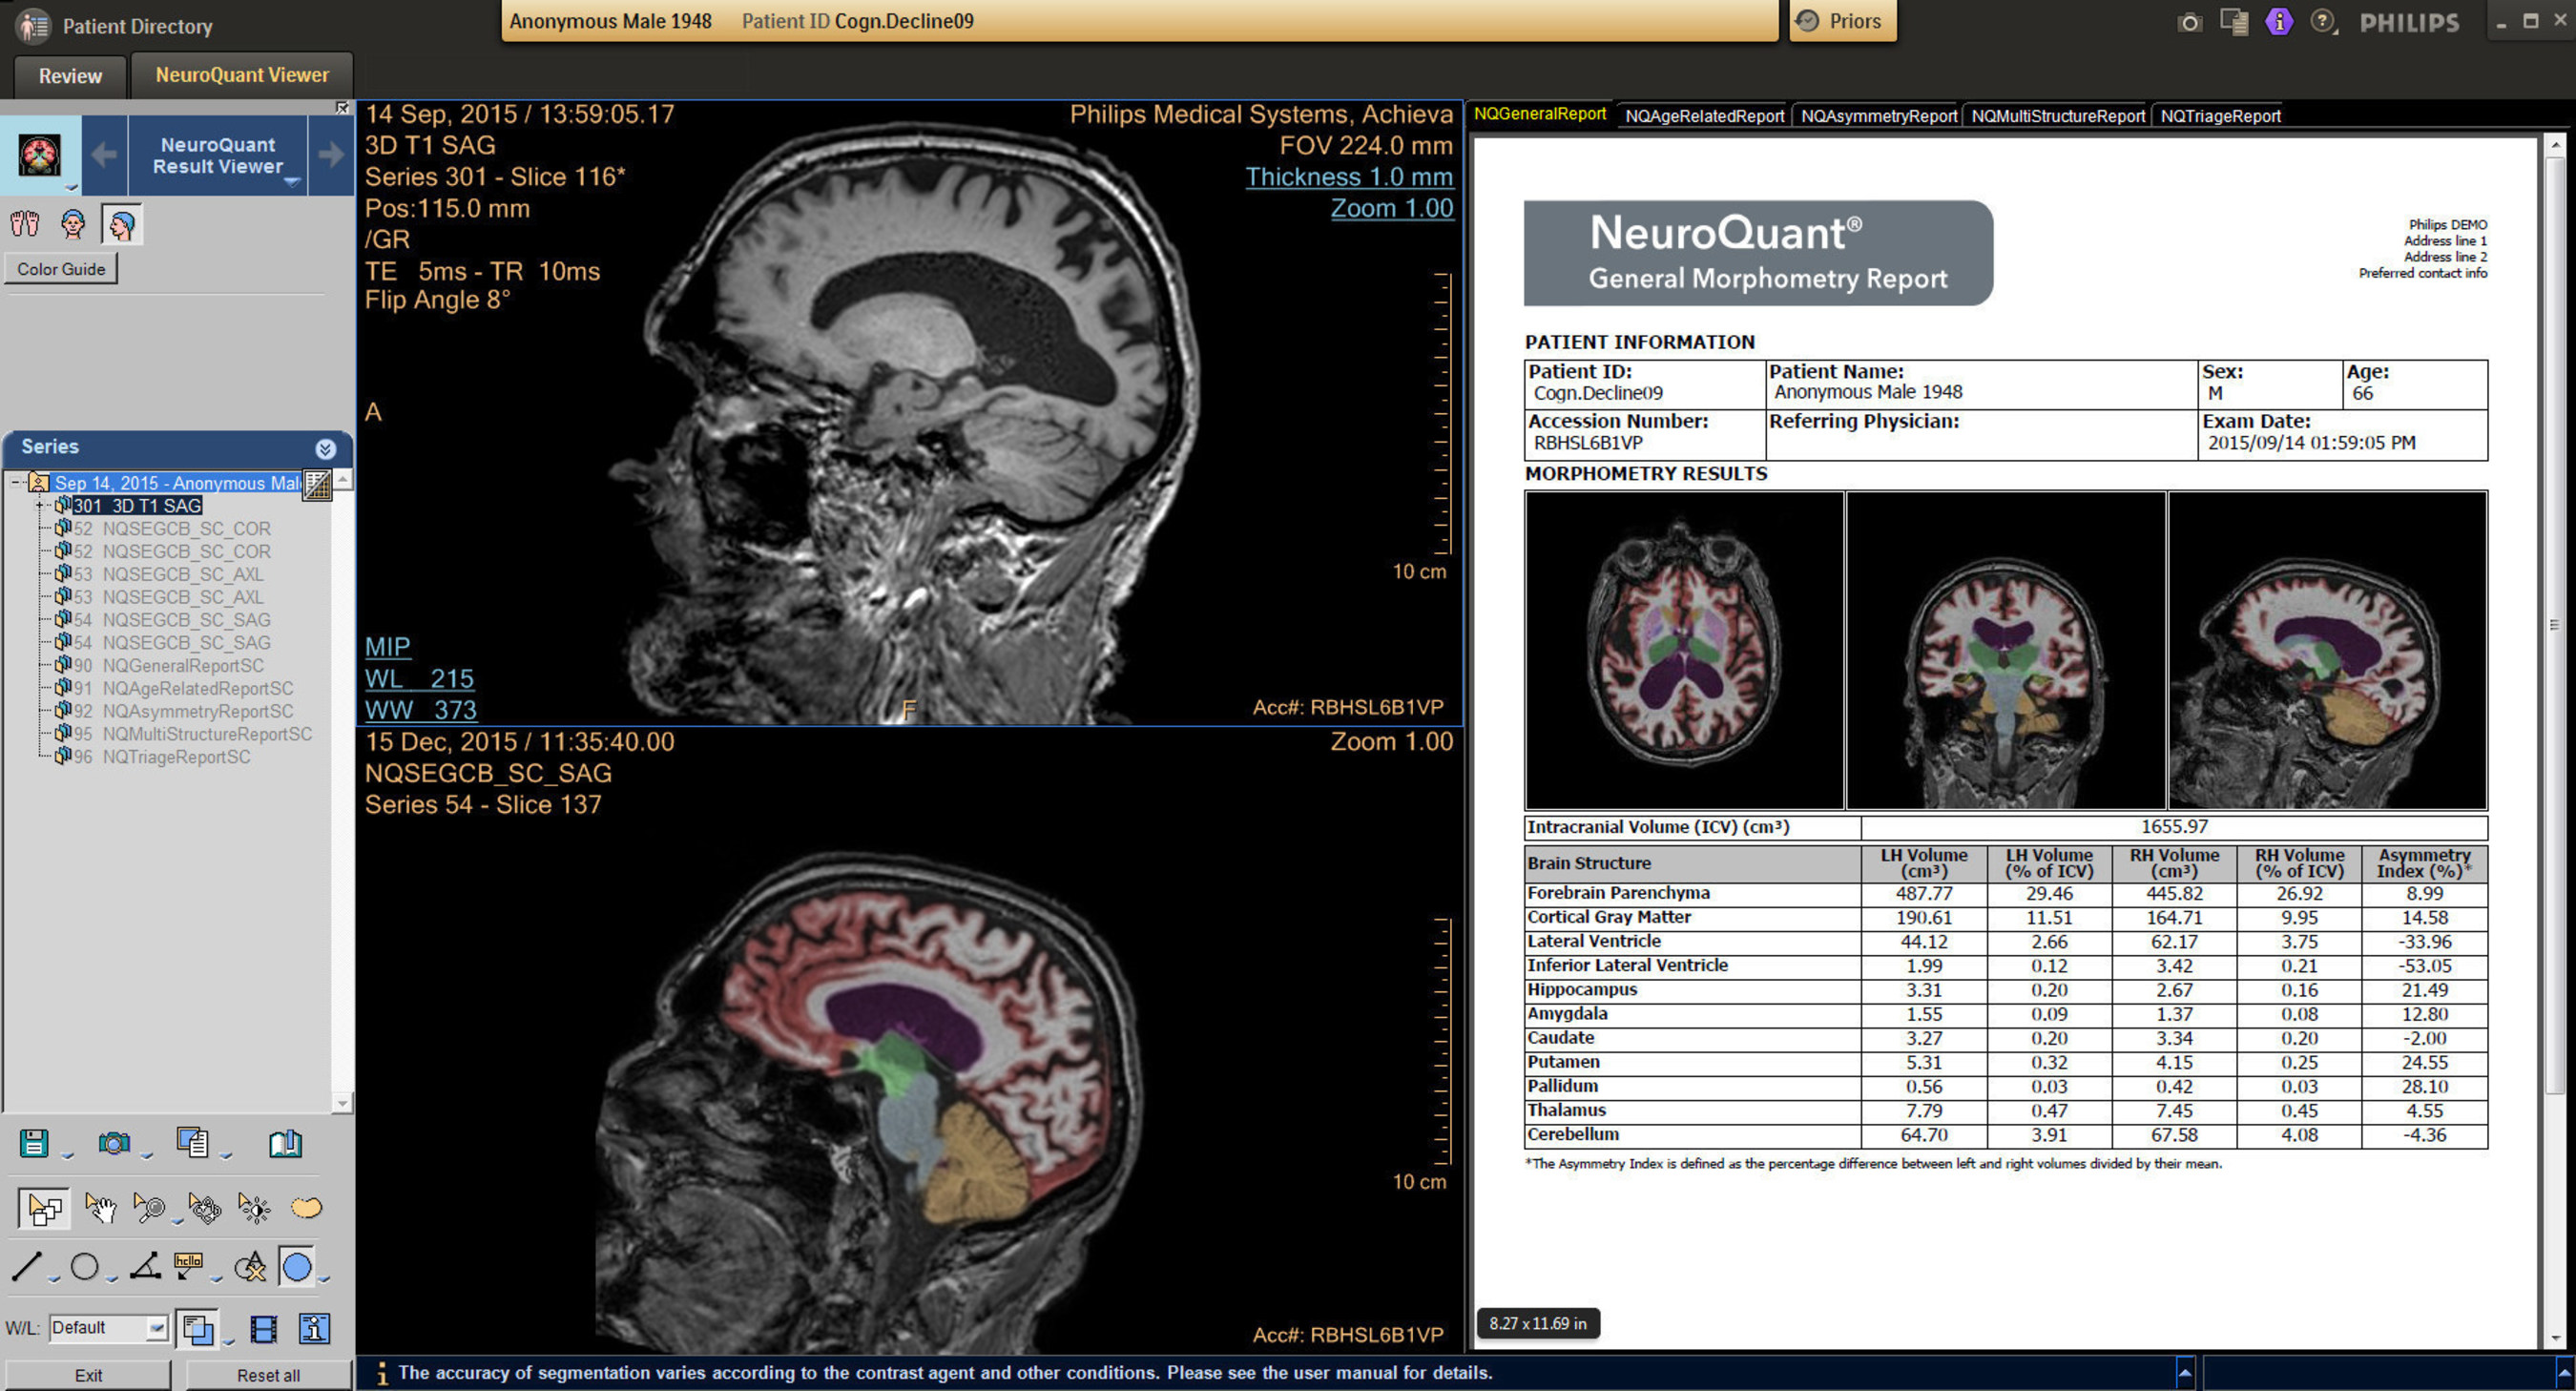 Another feature of IntelliSpace Portal 9.0 is the inclusion of the NeuroQuant(R) application (Cortechs Labs, Inc.), which enables clinicians to objectively quantify brain atrophy.